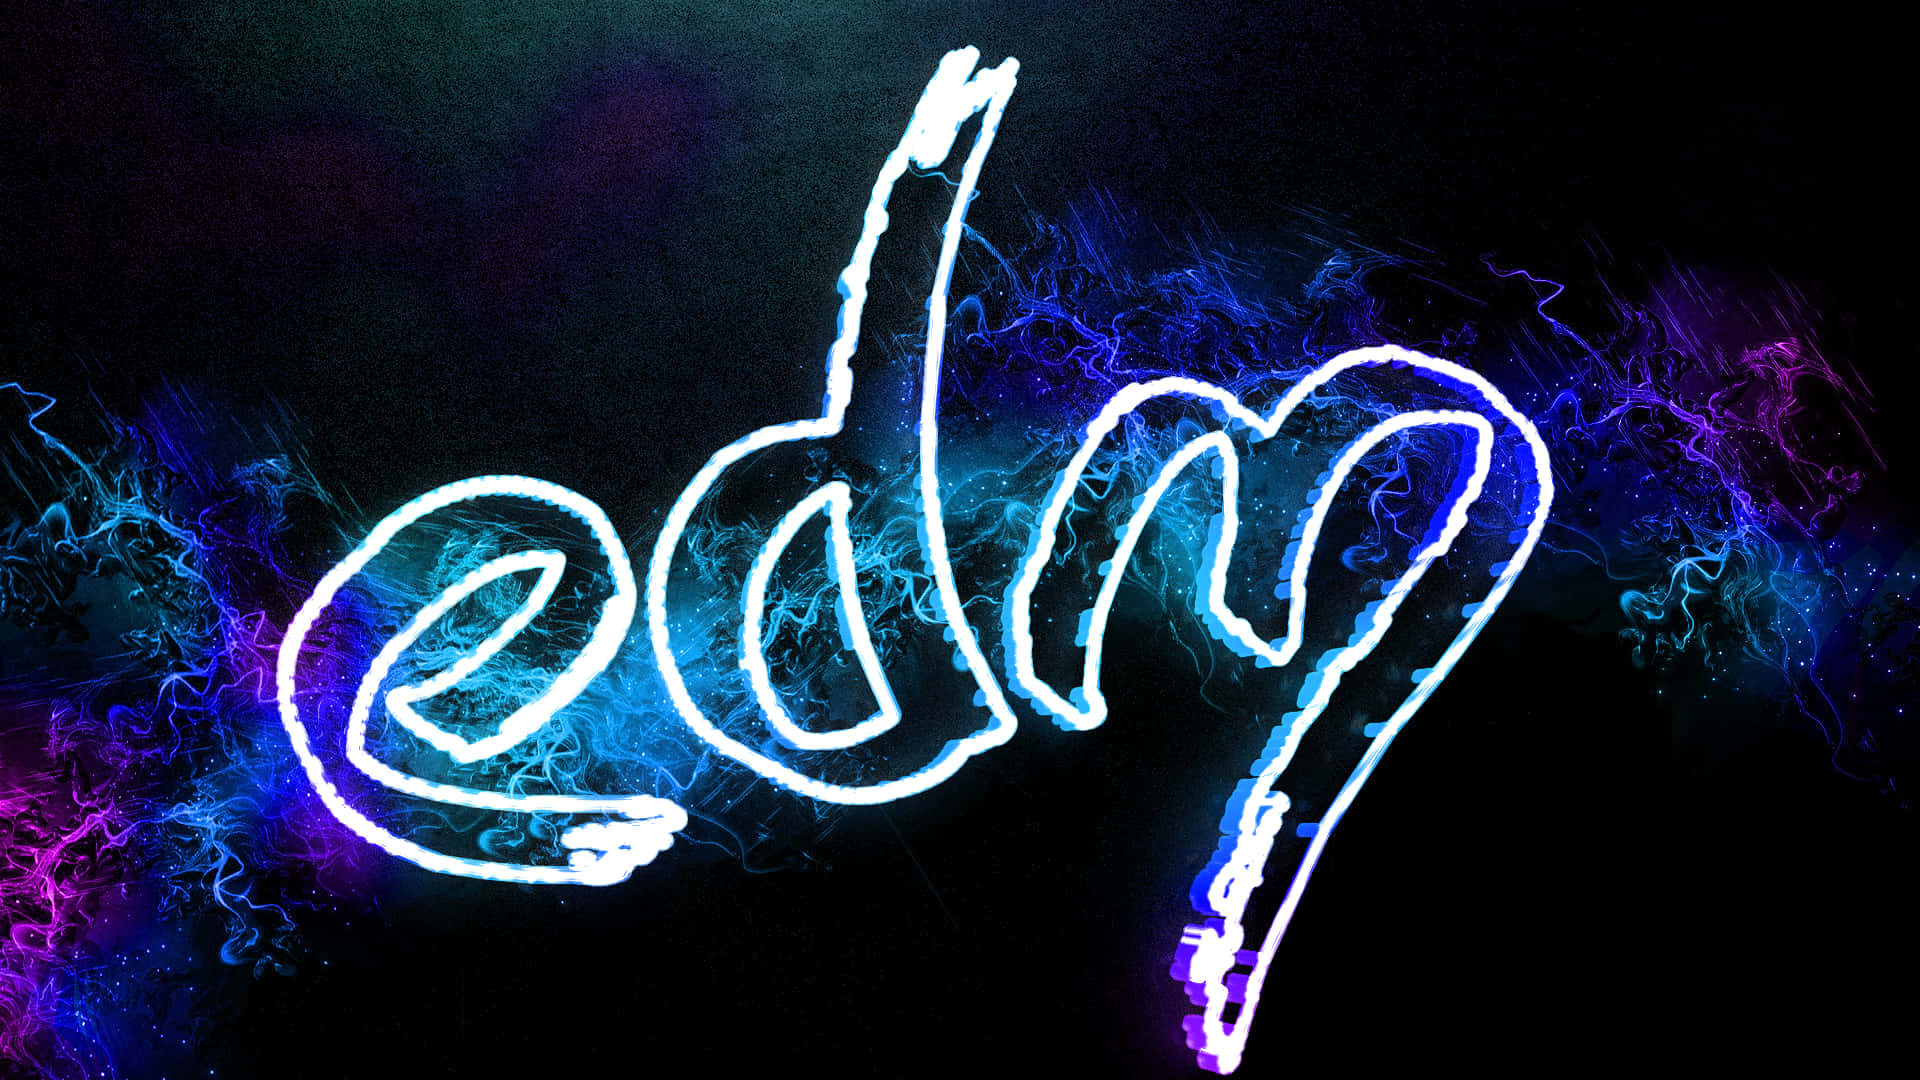 Free Edm Wallpaper Downloads, [100+] Edm Wallpapers for FREE | Wallpapers .com